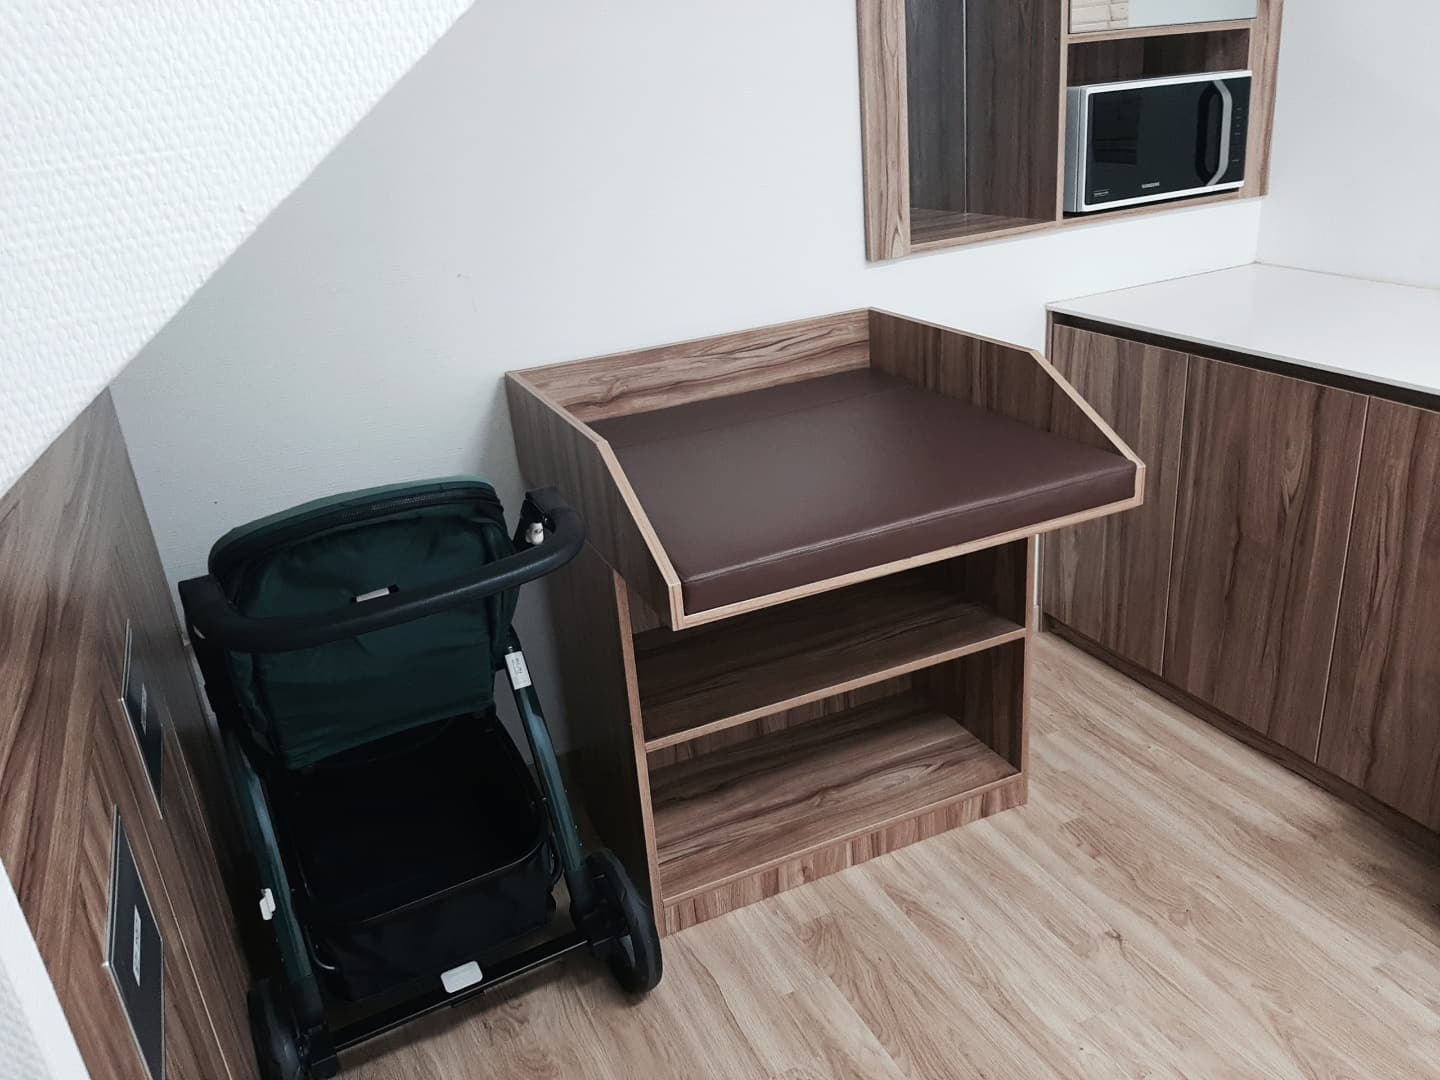 Nursing room 0 : A diaper changing station and a stroller in a nursing room